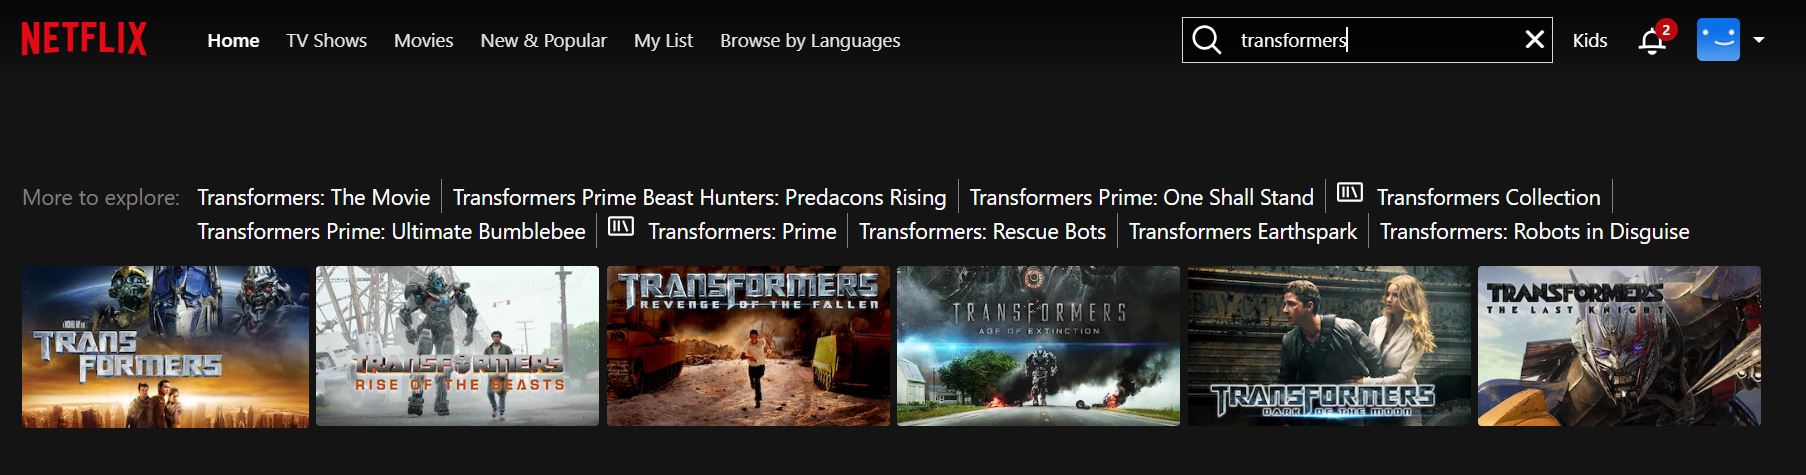 Are all Transformer movies on Netflix